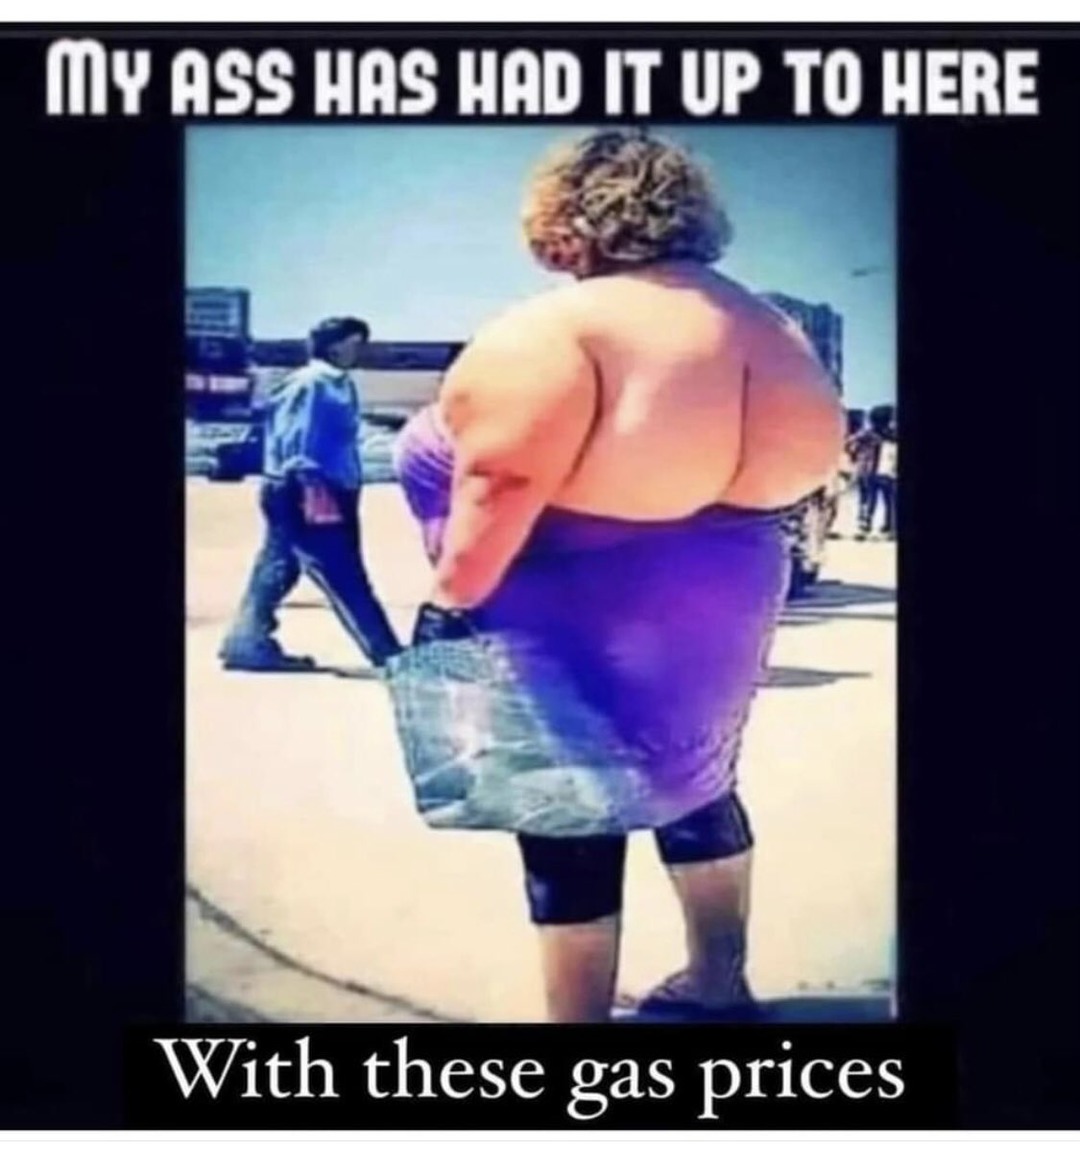 Gas prices are as high as her butt - meme